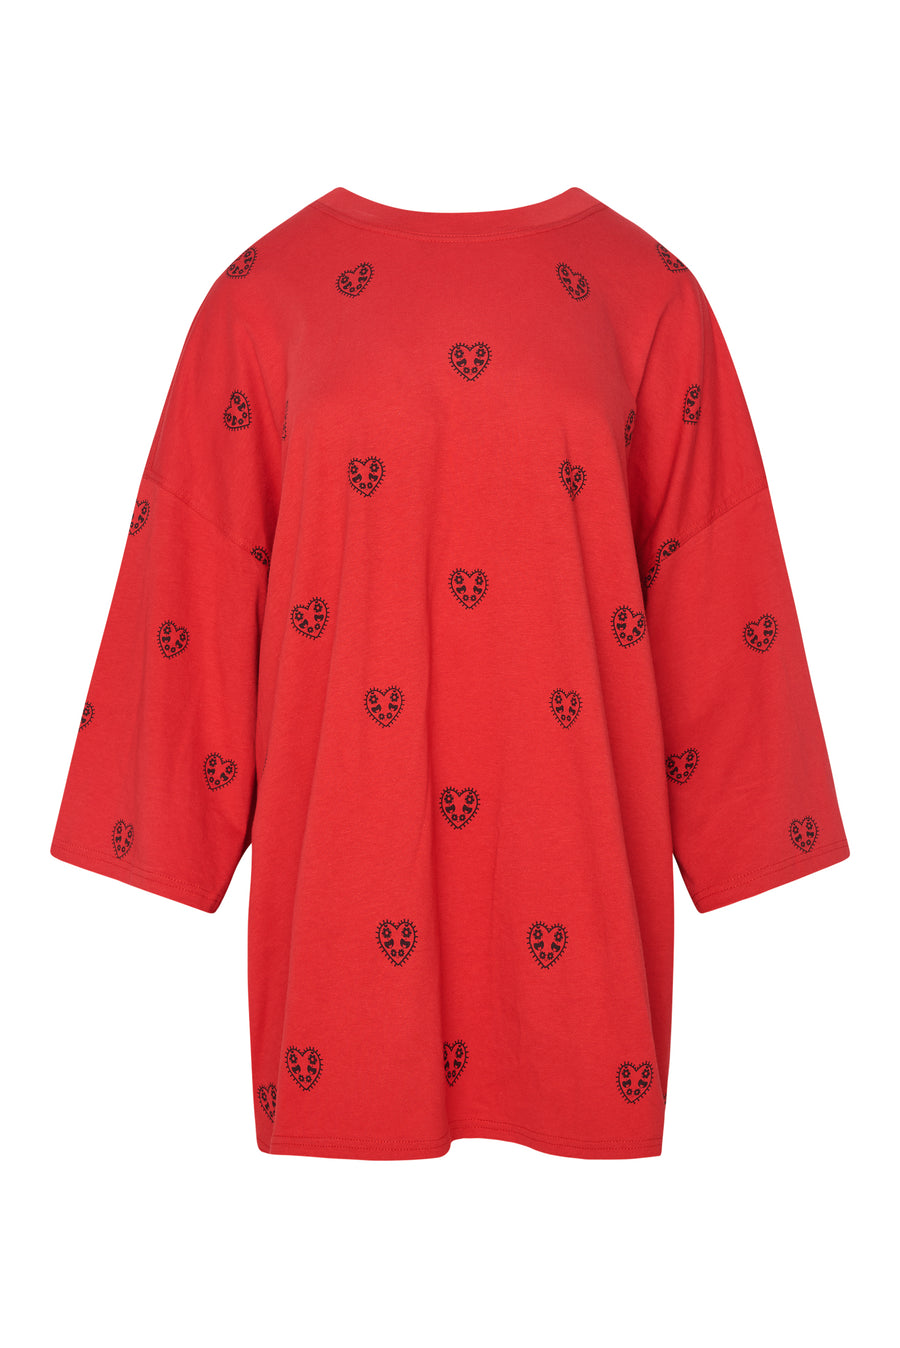 Whitney T-Shirt (Hearts pattern red)